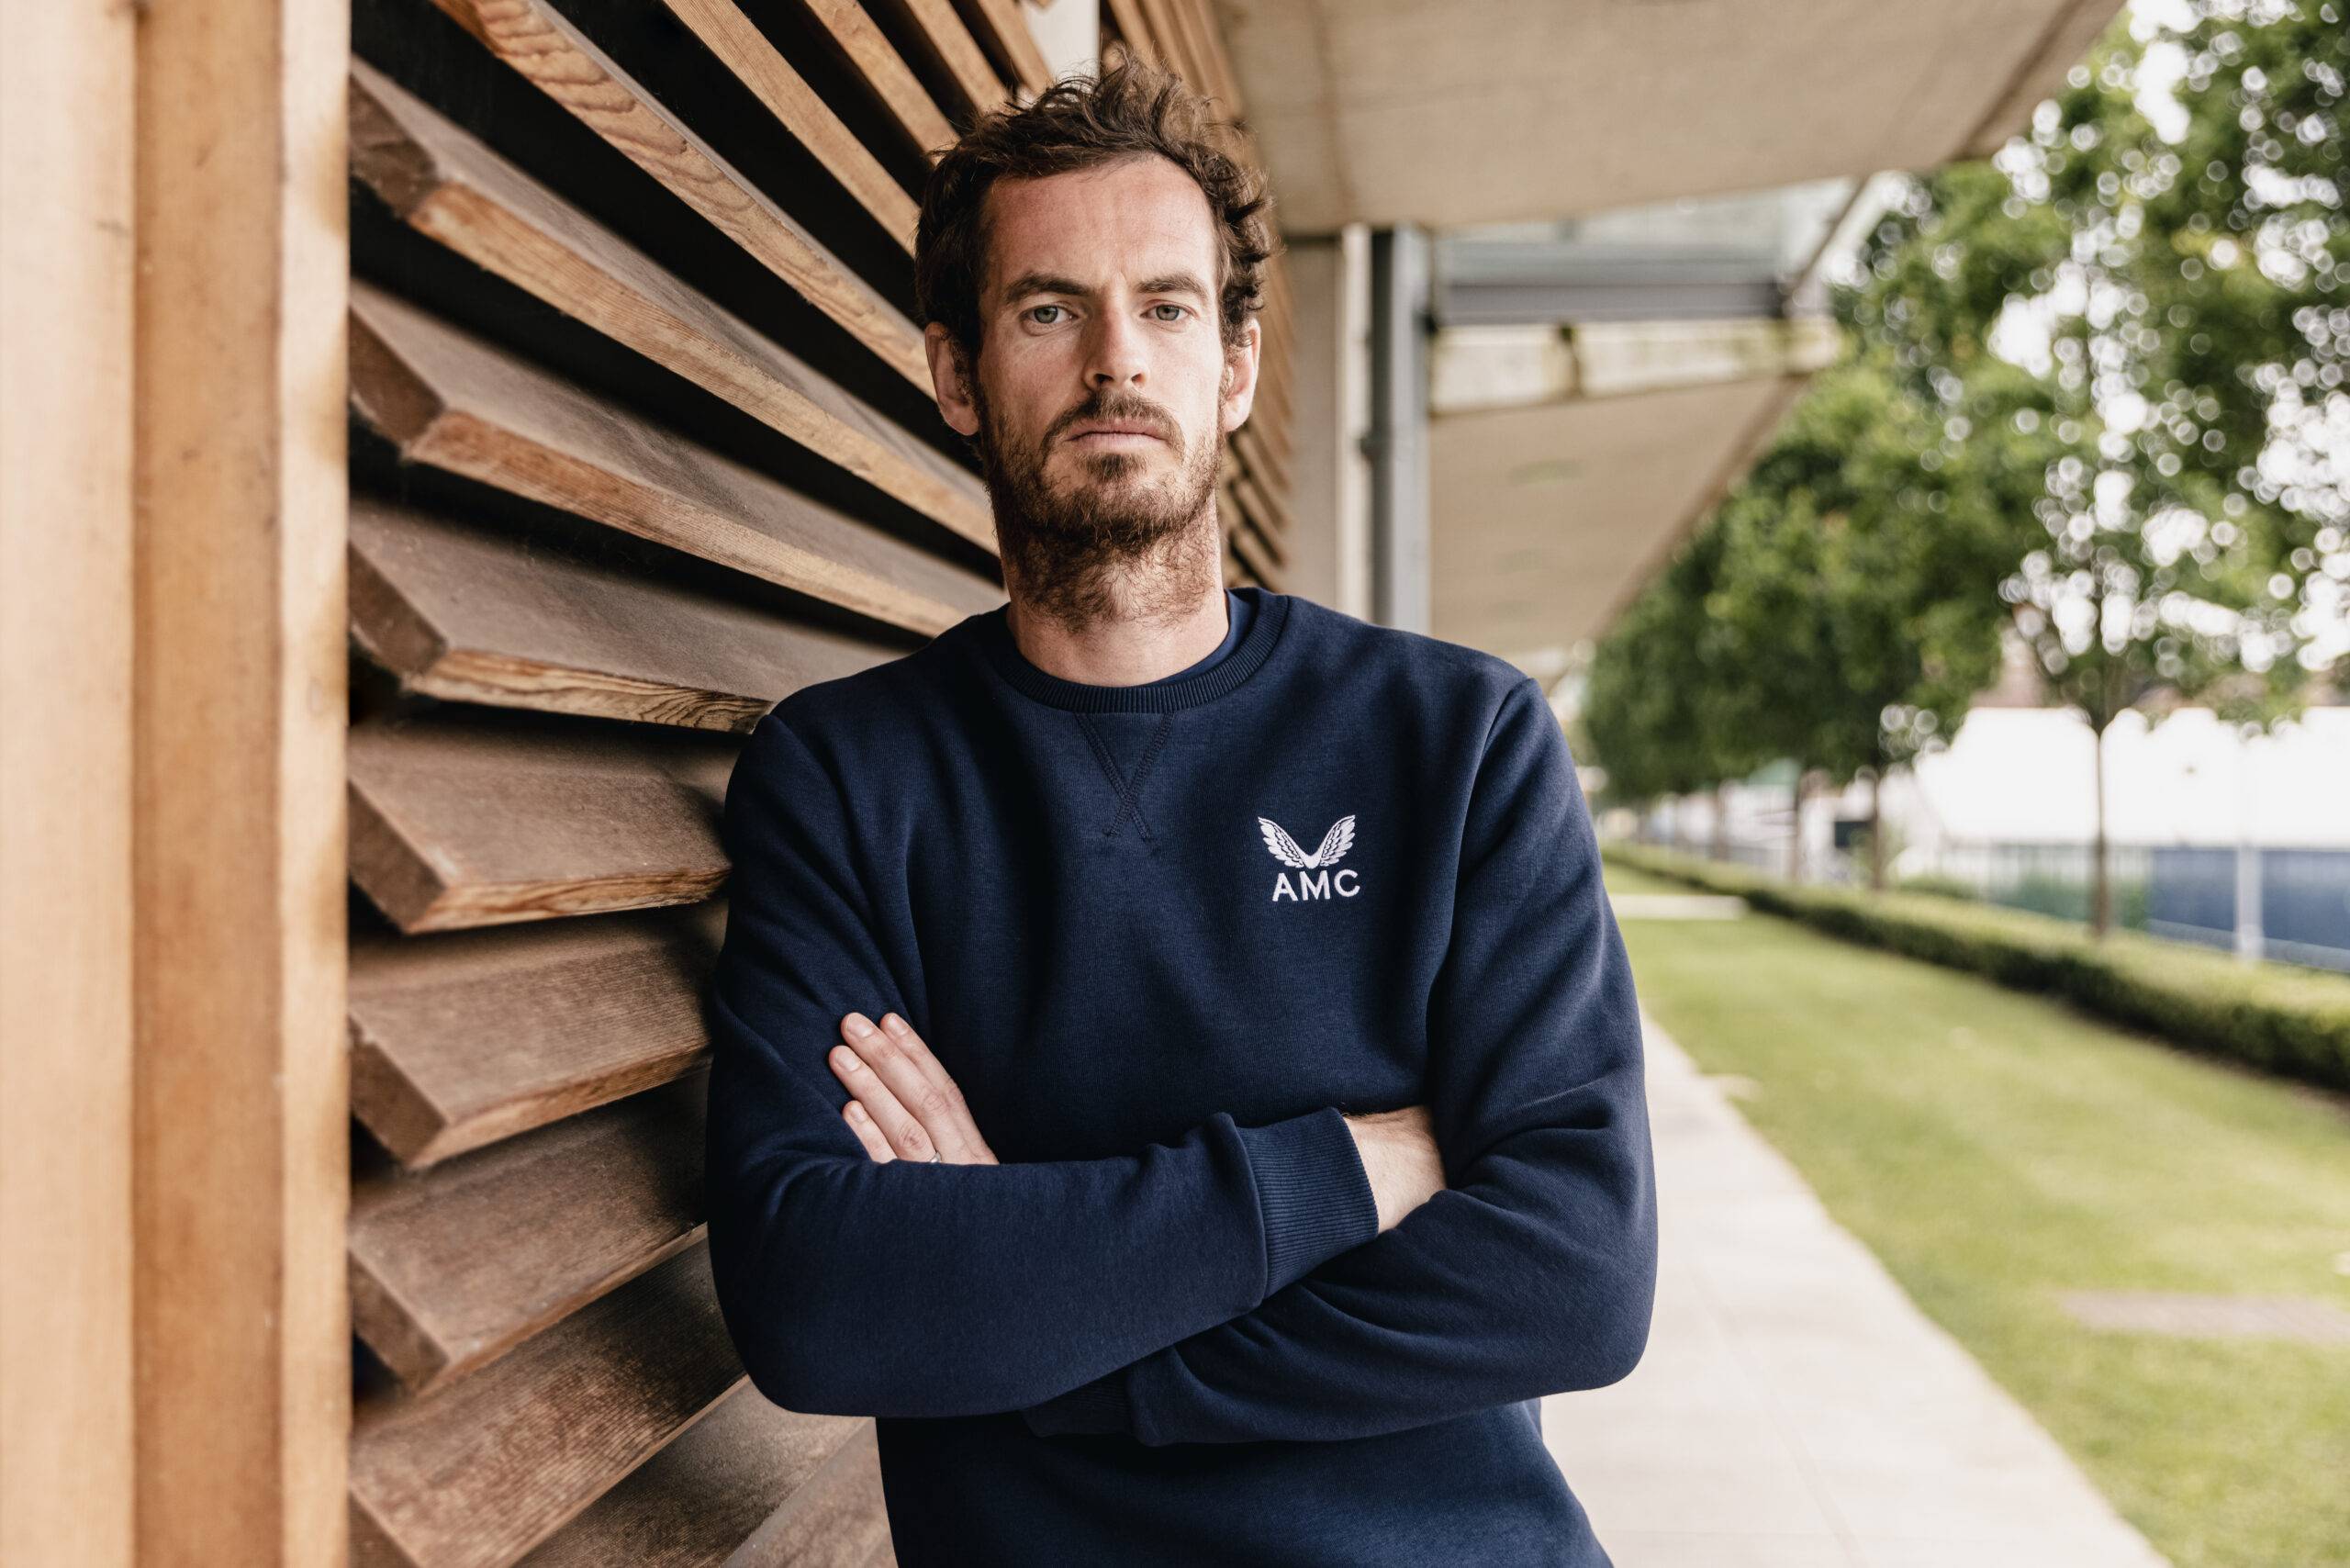 Castore: The British brothers looking to take on sportswear’s biggest brands